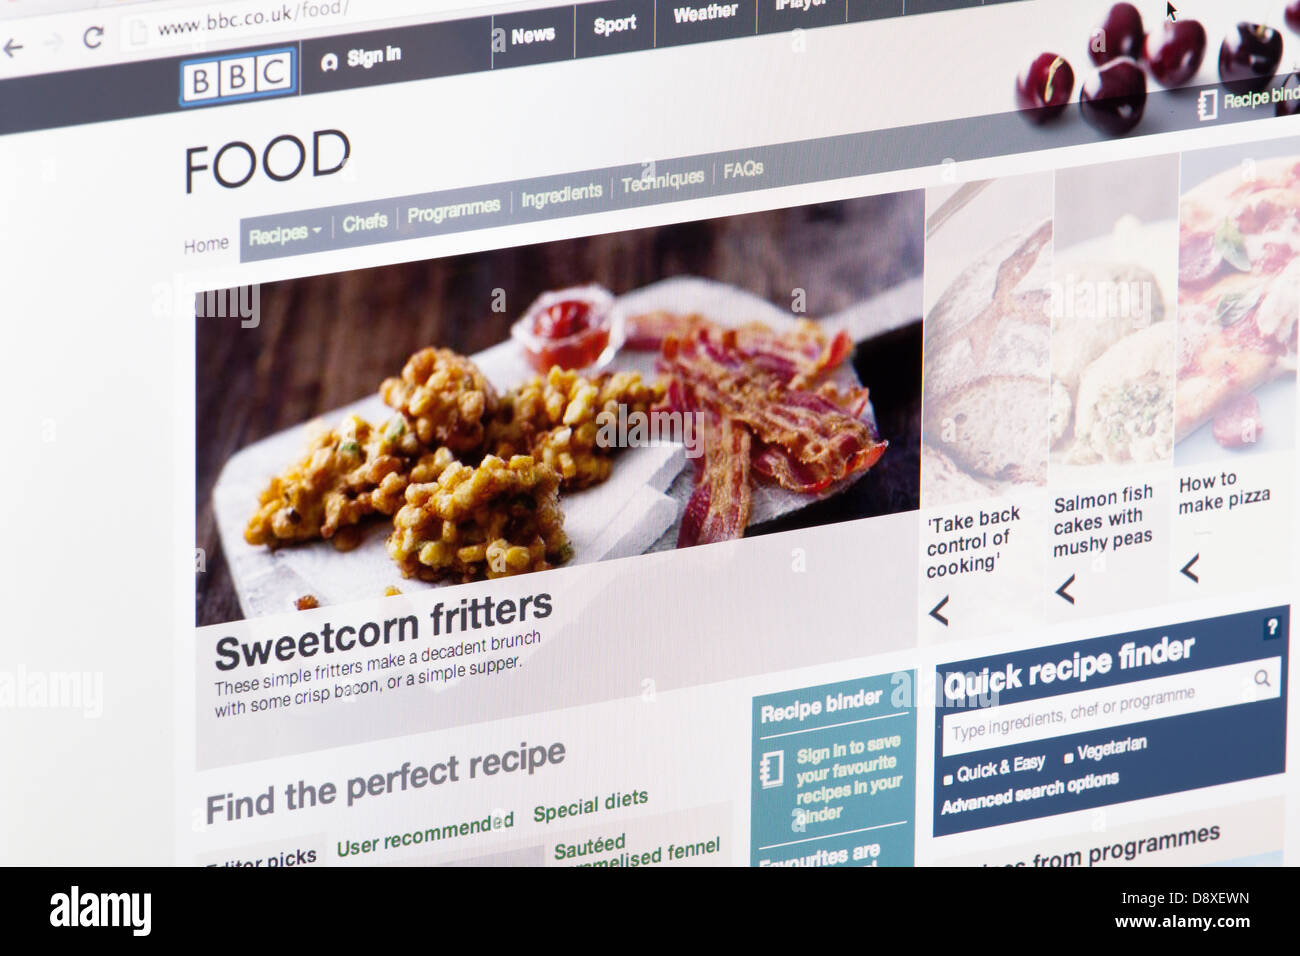 BBC Food online recipes Website or web page on a laptop screen or computer monitor Stock Photo